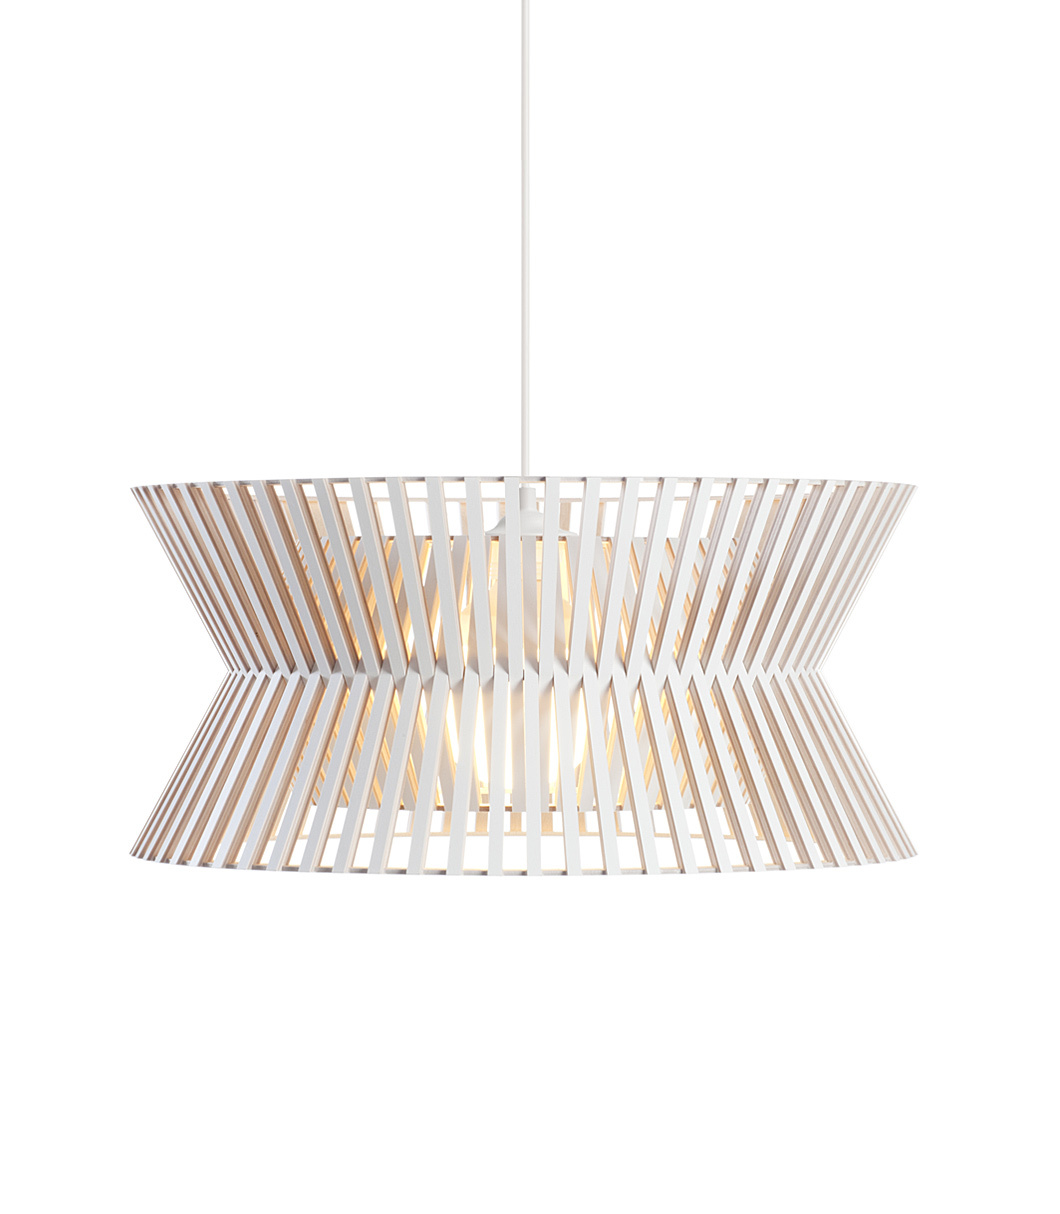 Kontro 6000 pendant lamp is available in white laminated